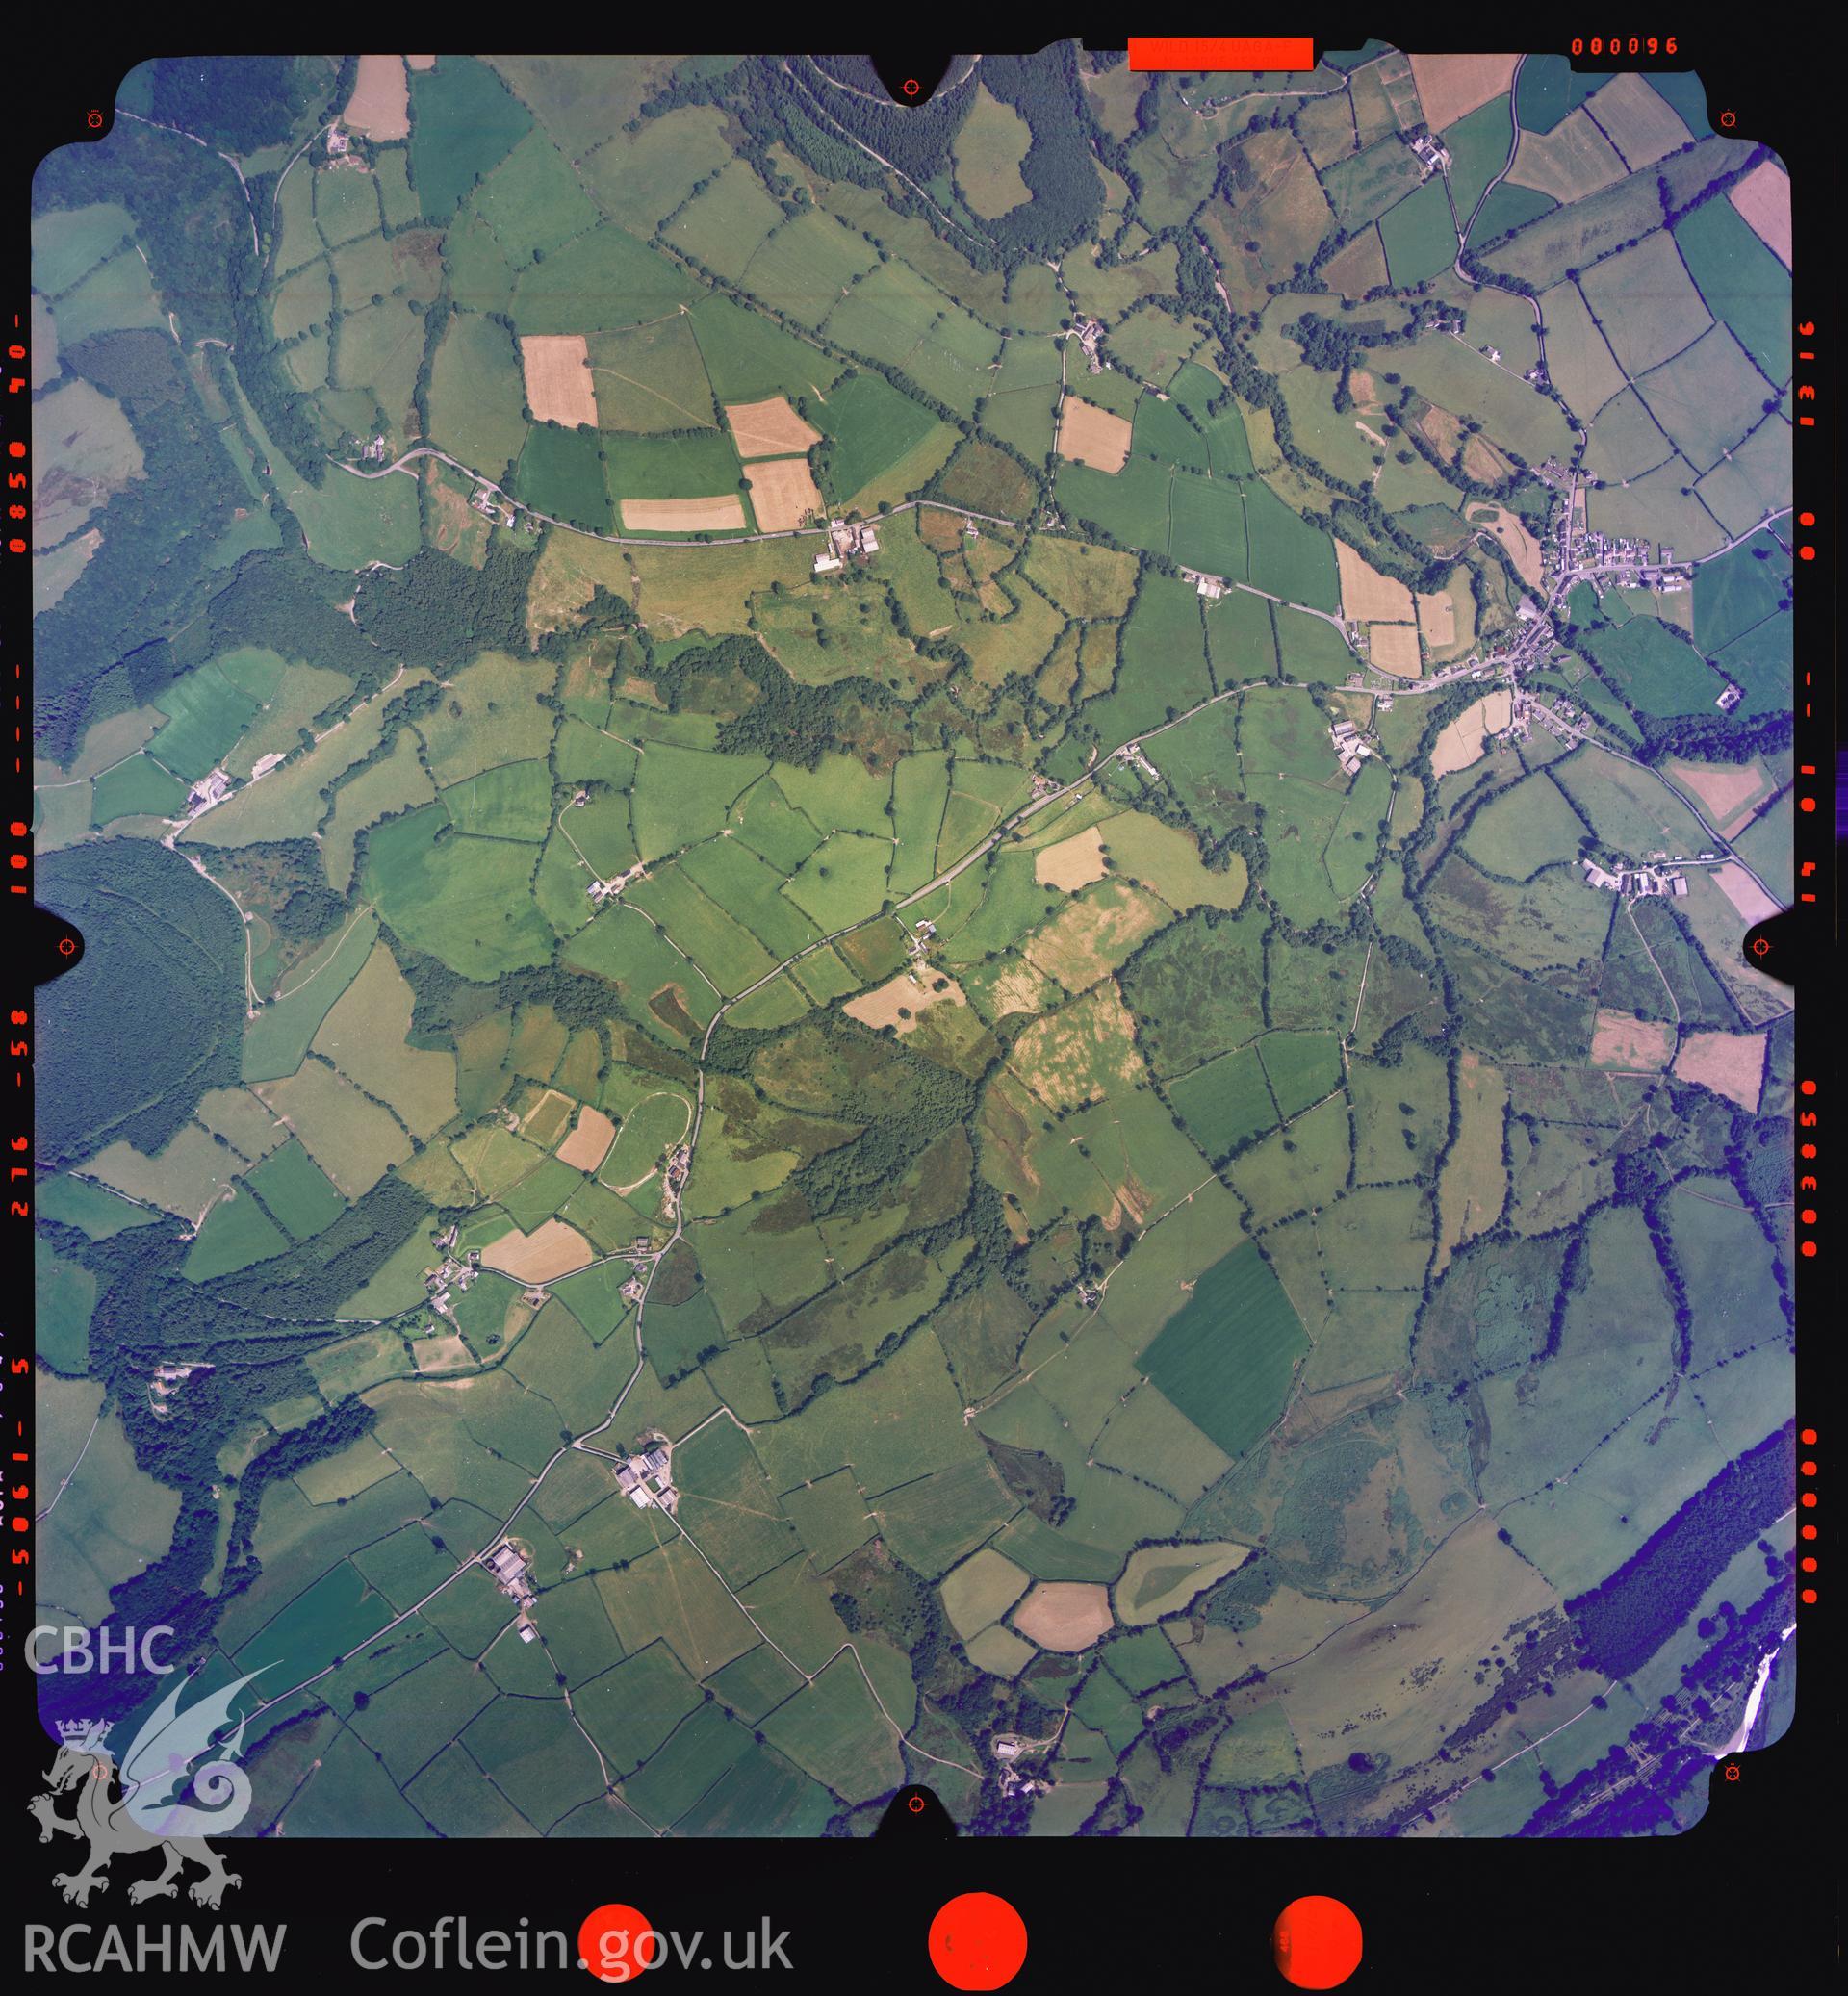 Digitized copy of an aerial photograph showing the Llansawel area, taken by Ordnance Survey, 2001.